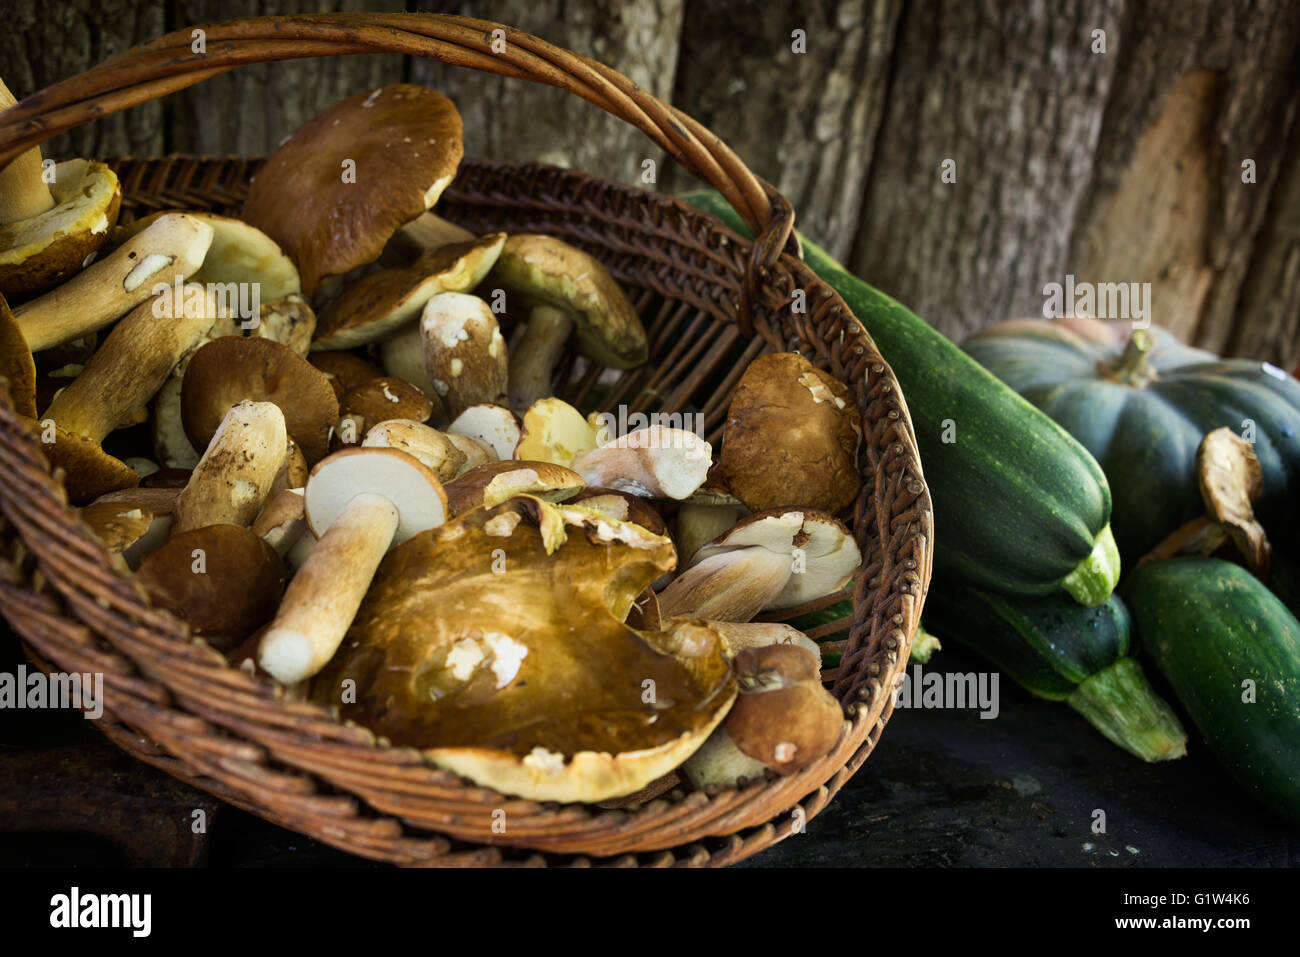 Still life with autumn vegetables like a basket with fresh picked porcini mushrooms, zucchini and pumpkin with a wooden wall. Stock Photo